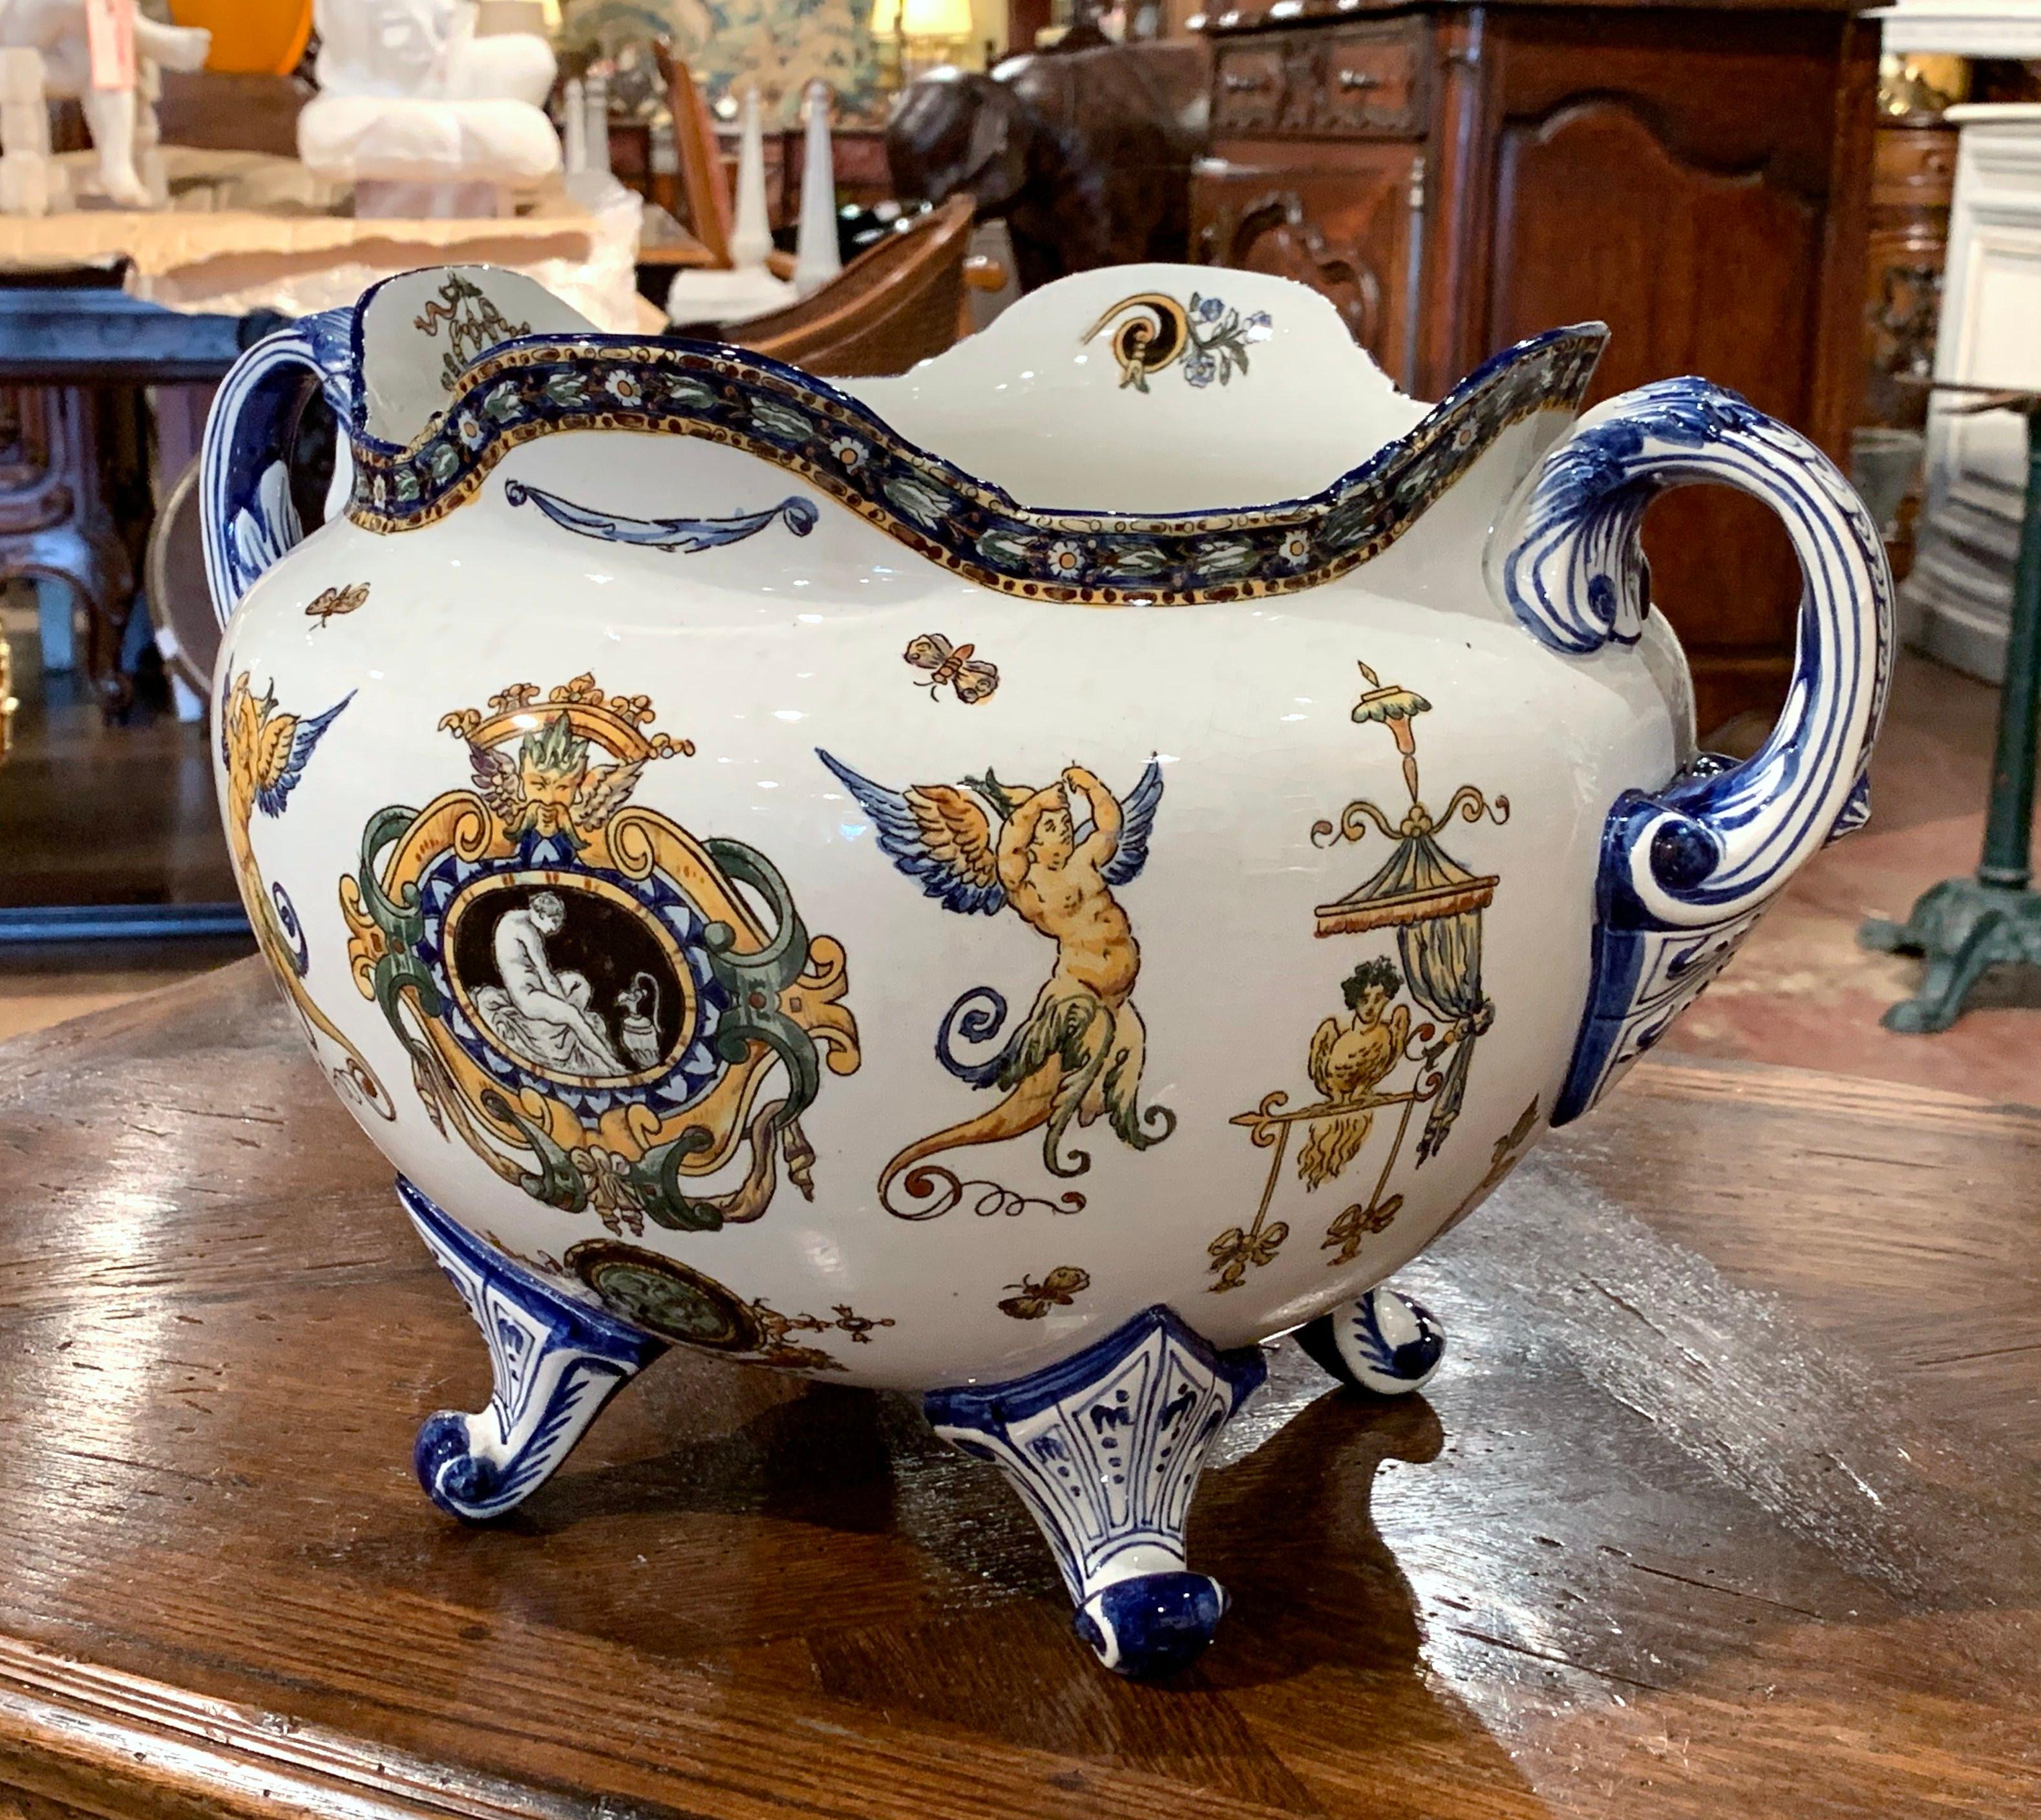 Decorate a table or a shelf with this elegant antique planter. Created in the “Faïencerie de Gien” France, circa 1890, the large cachepot is round in shape with a scalloped rim, two large handles and four curved feet. The ceramic planter is